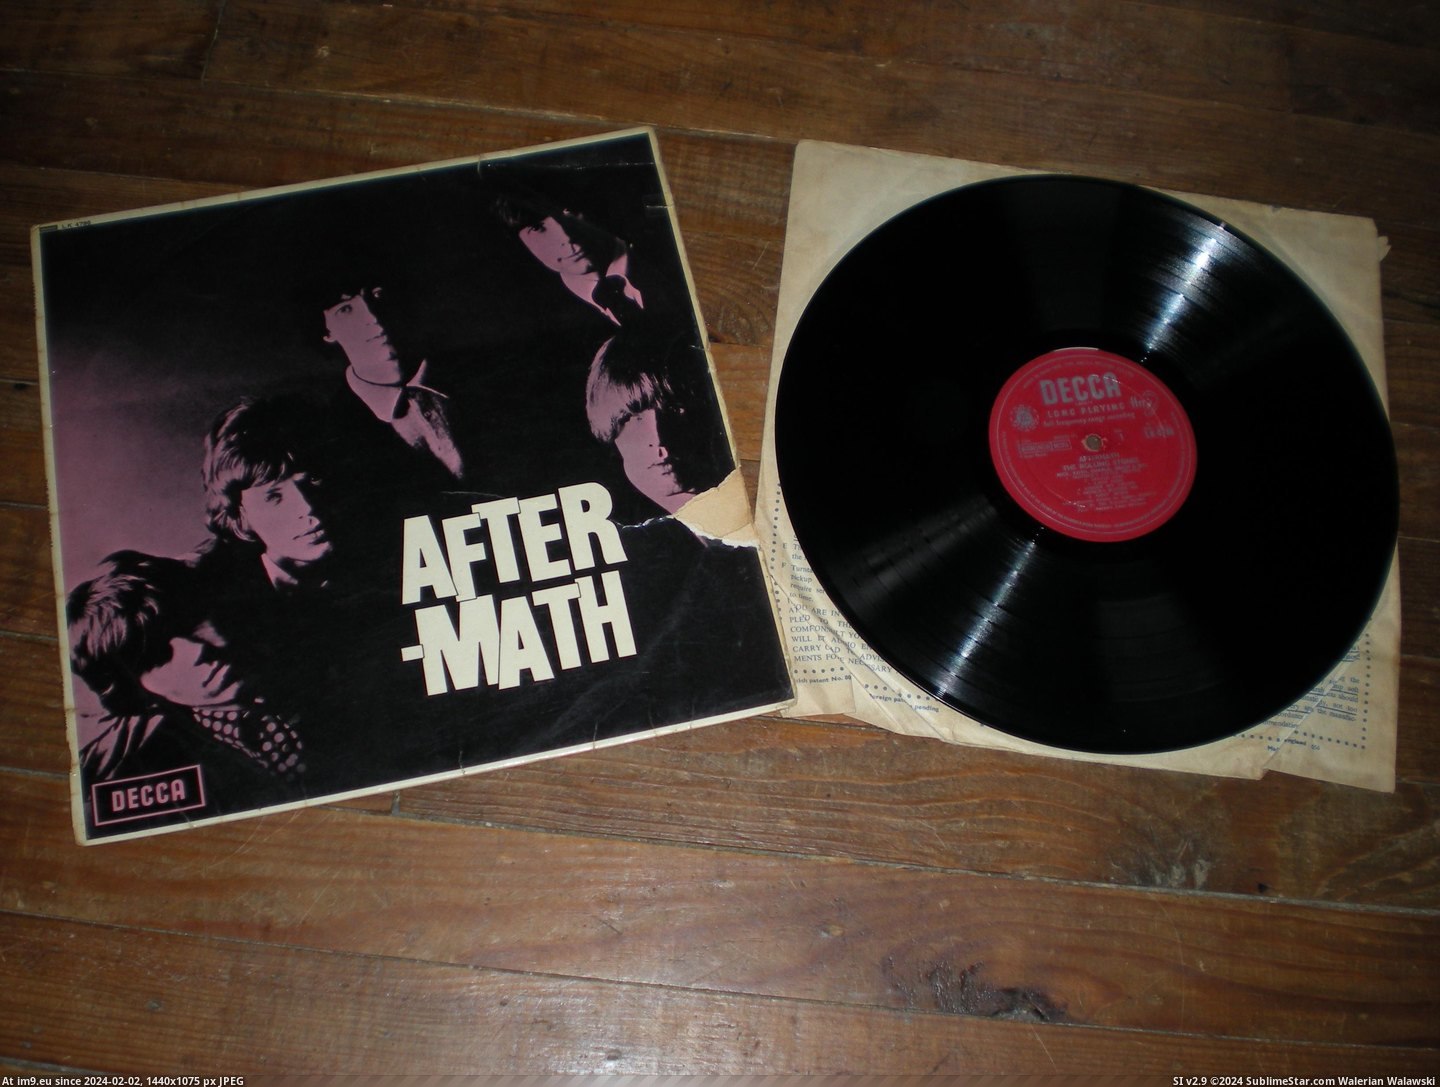  #Aftermath  Aftermath 2 Pic. (Image of album new 1))